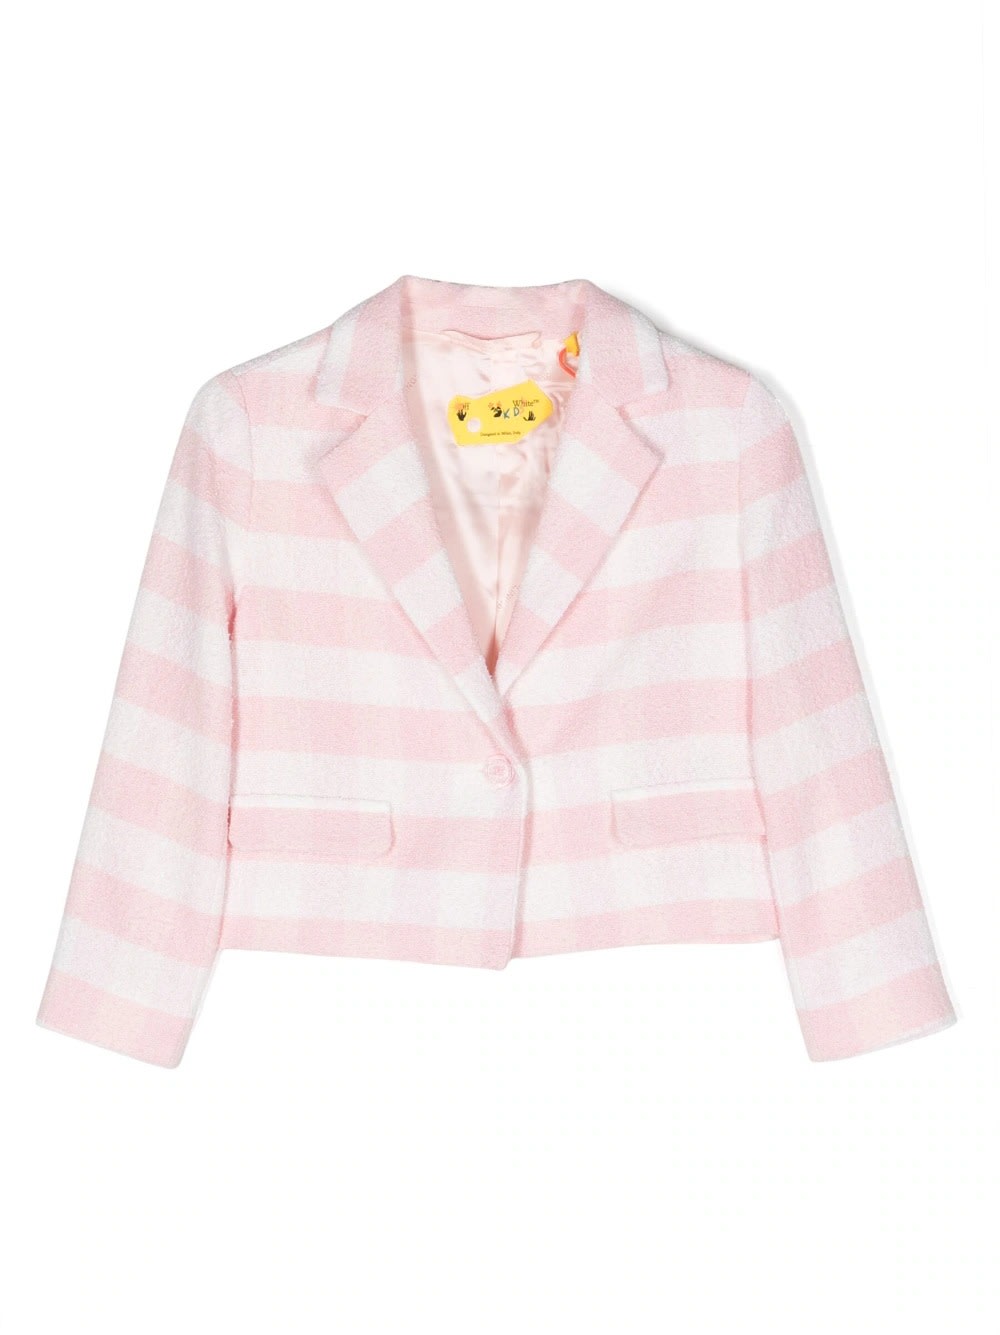 OFF-WHITE PINK AND WHITE GINGHAM CHECK BLAZER